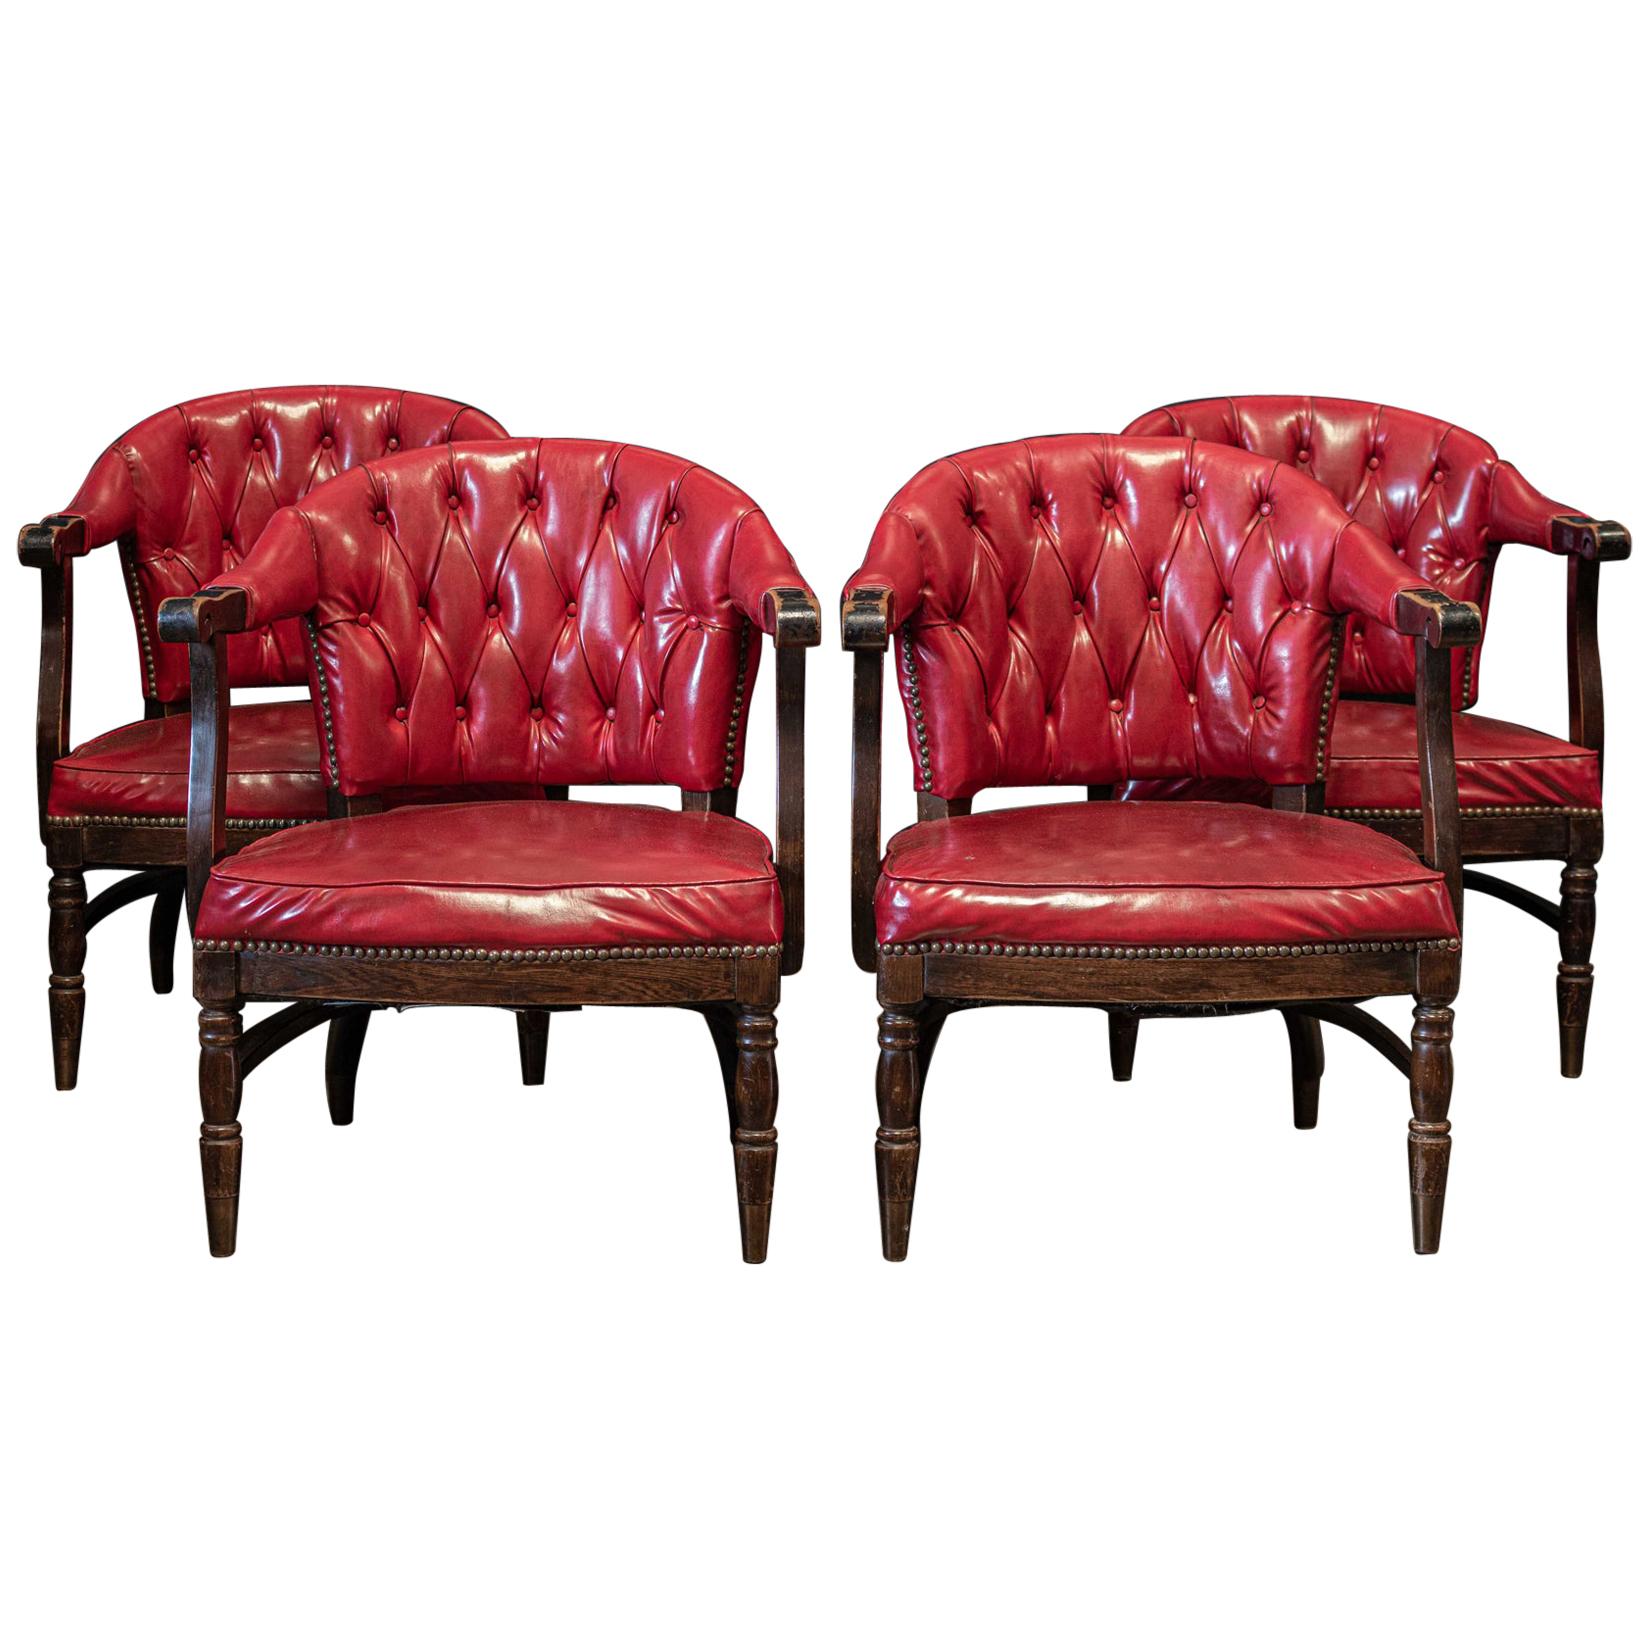 Pair of 1920's English Red Studded Club Chairs